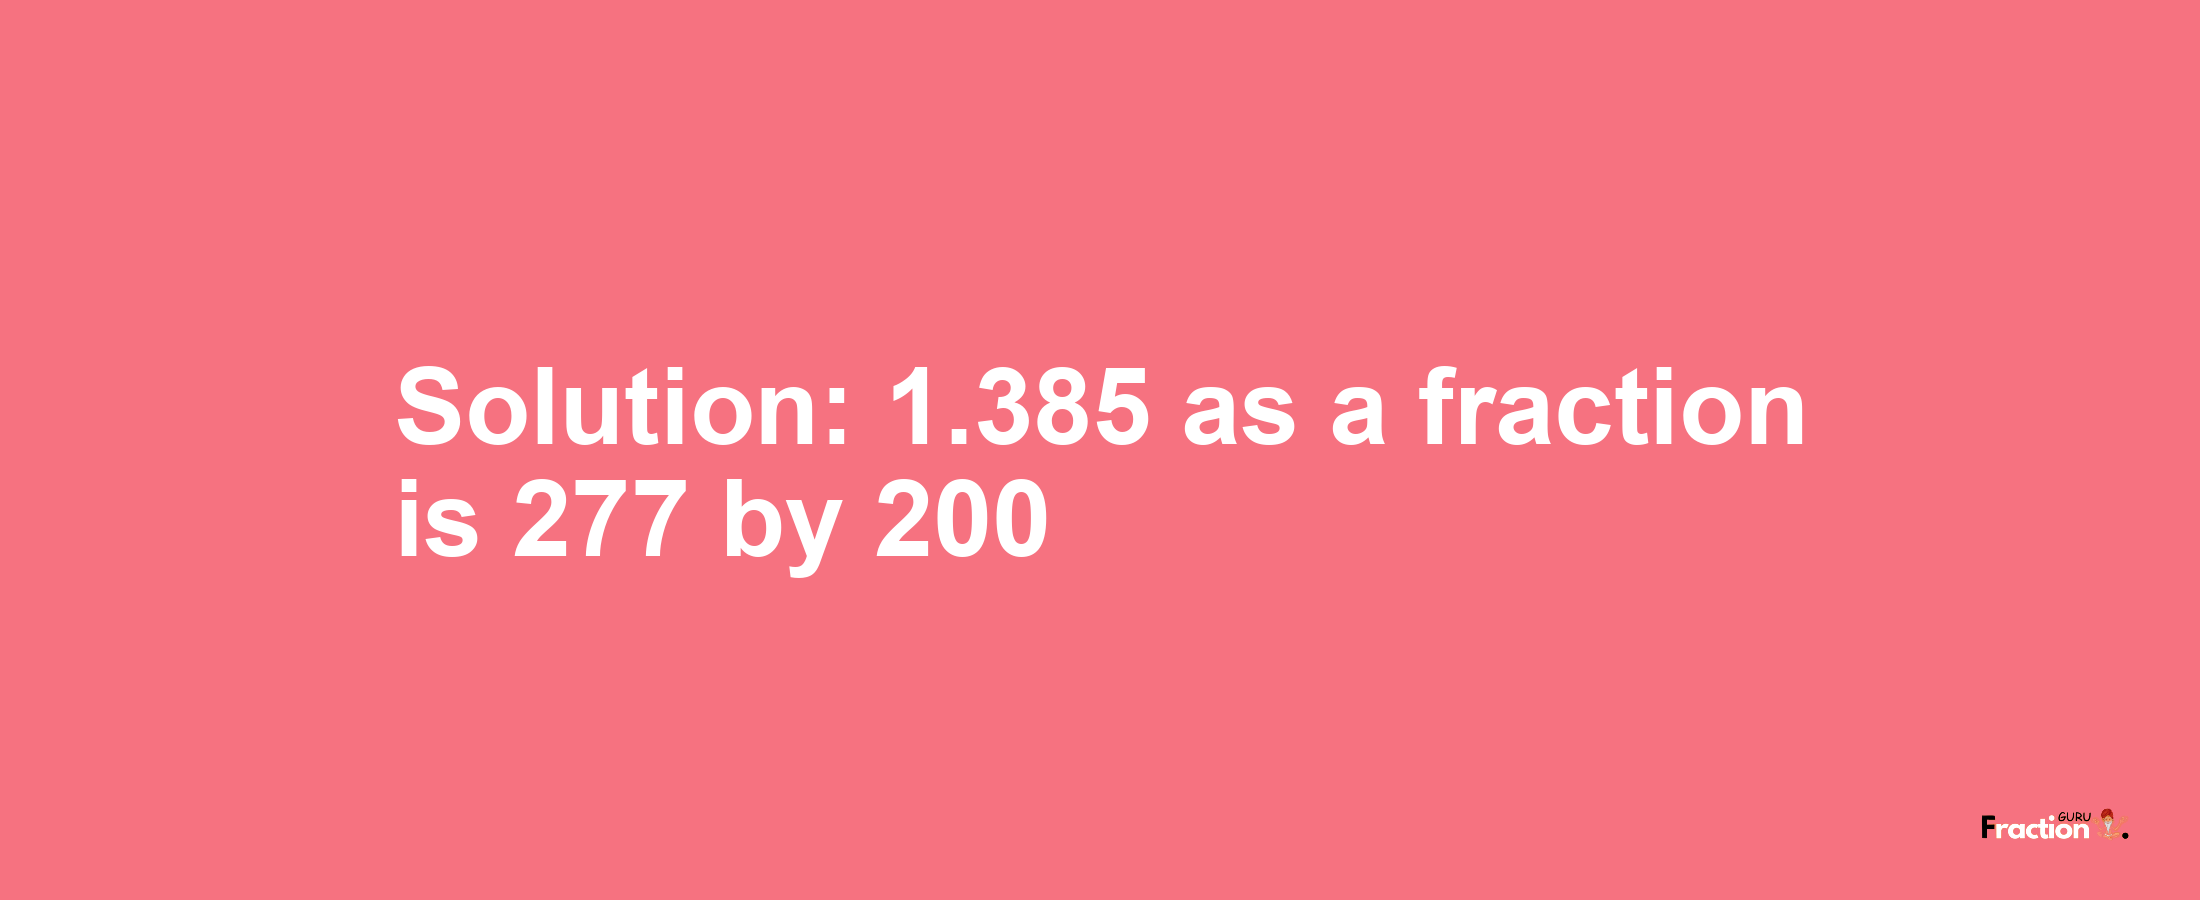 Solution:1.385 as a fraction is 277/200